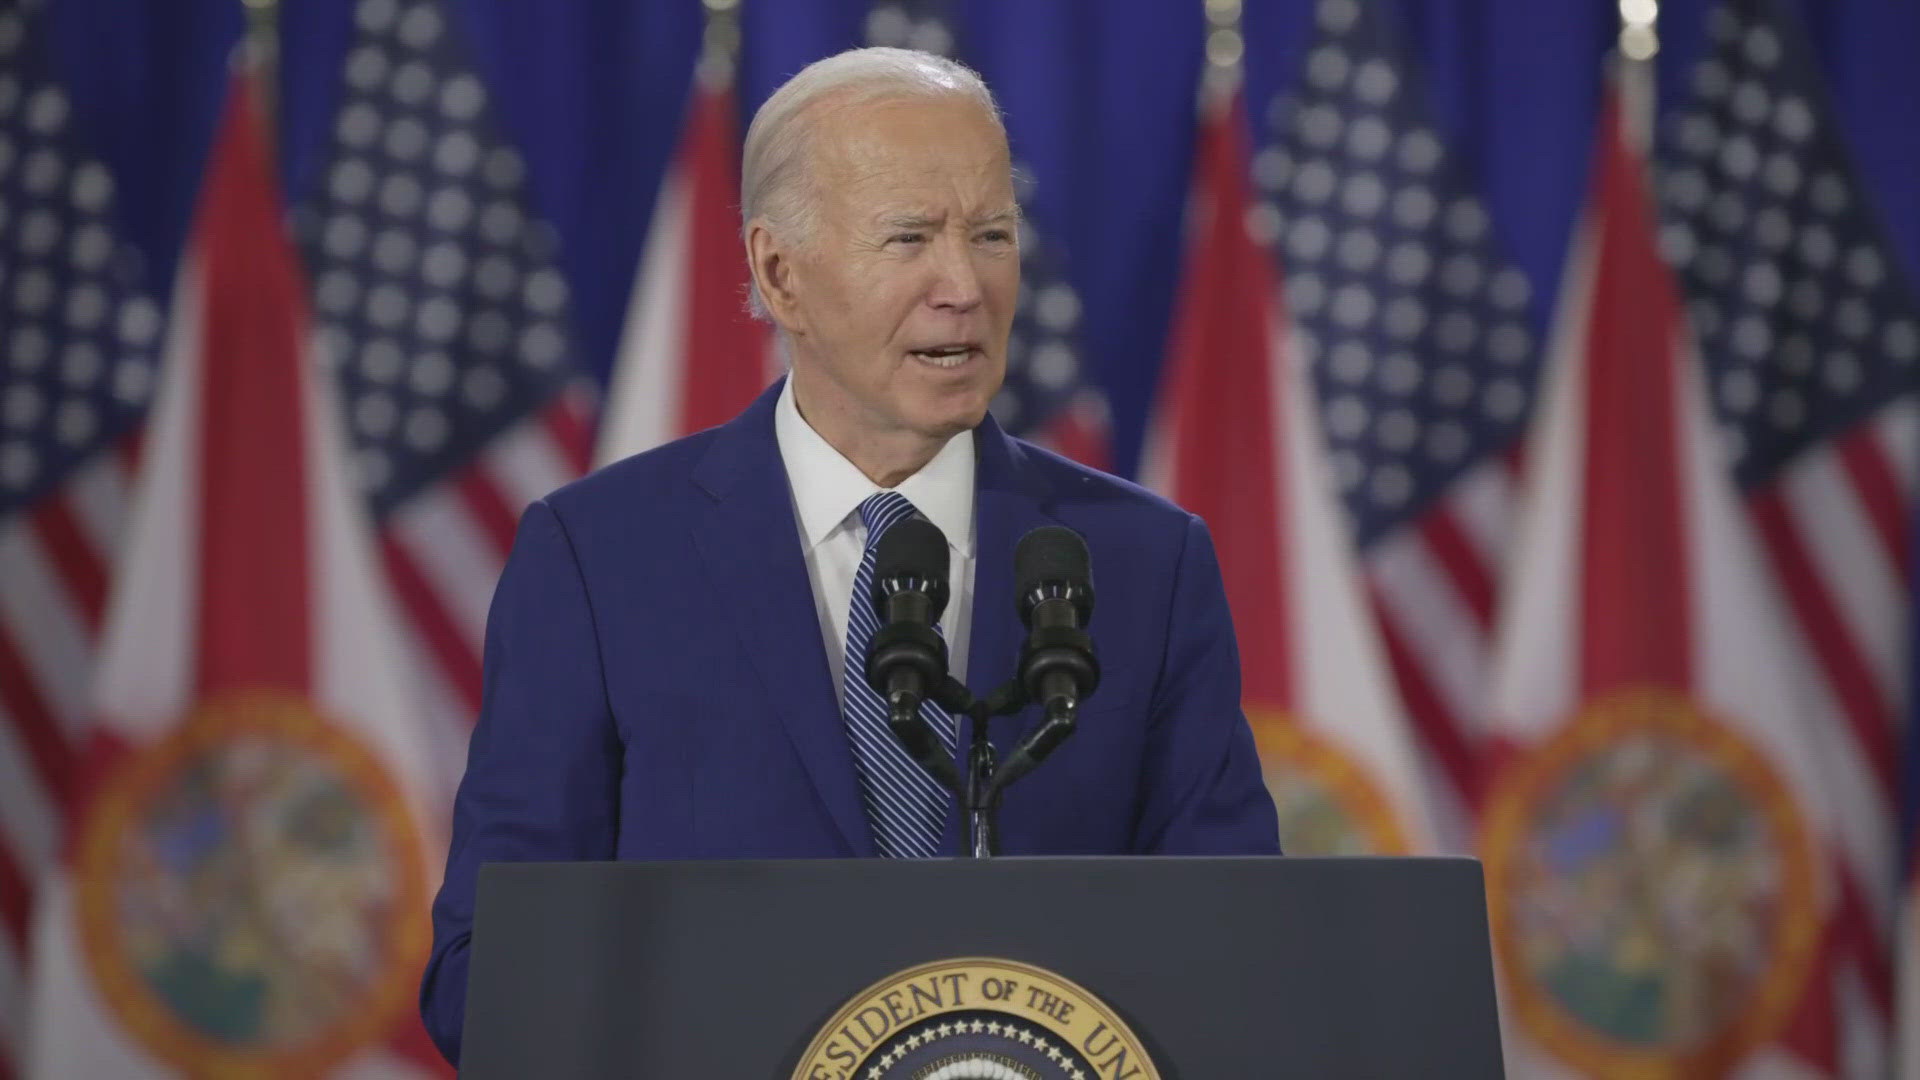 Biden's visit to Tampa put him at the center of the latest battle over abortion restrictions in Florida.